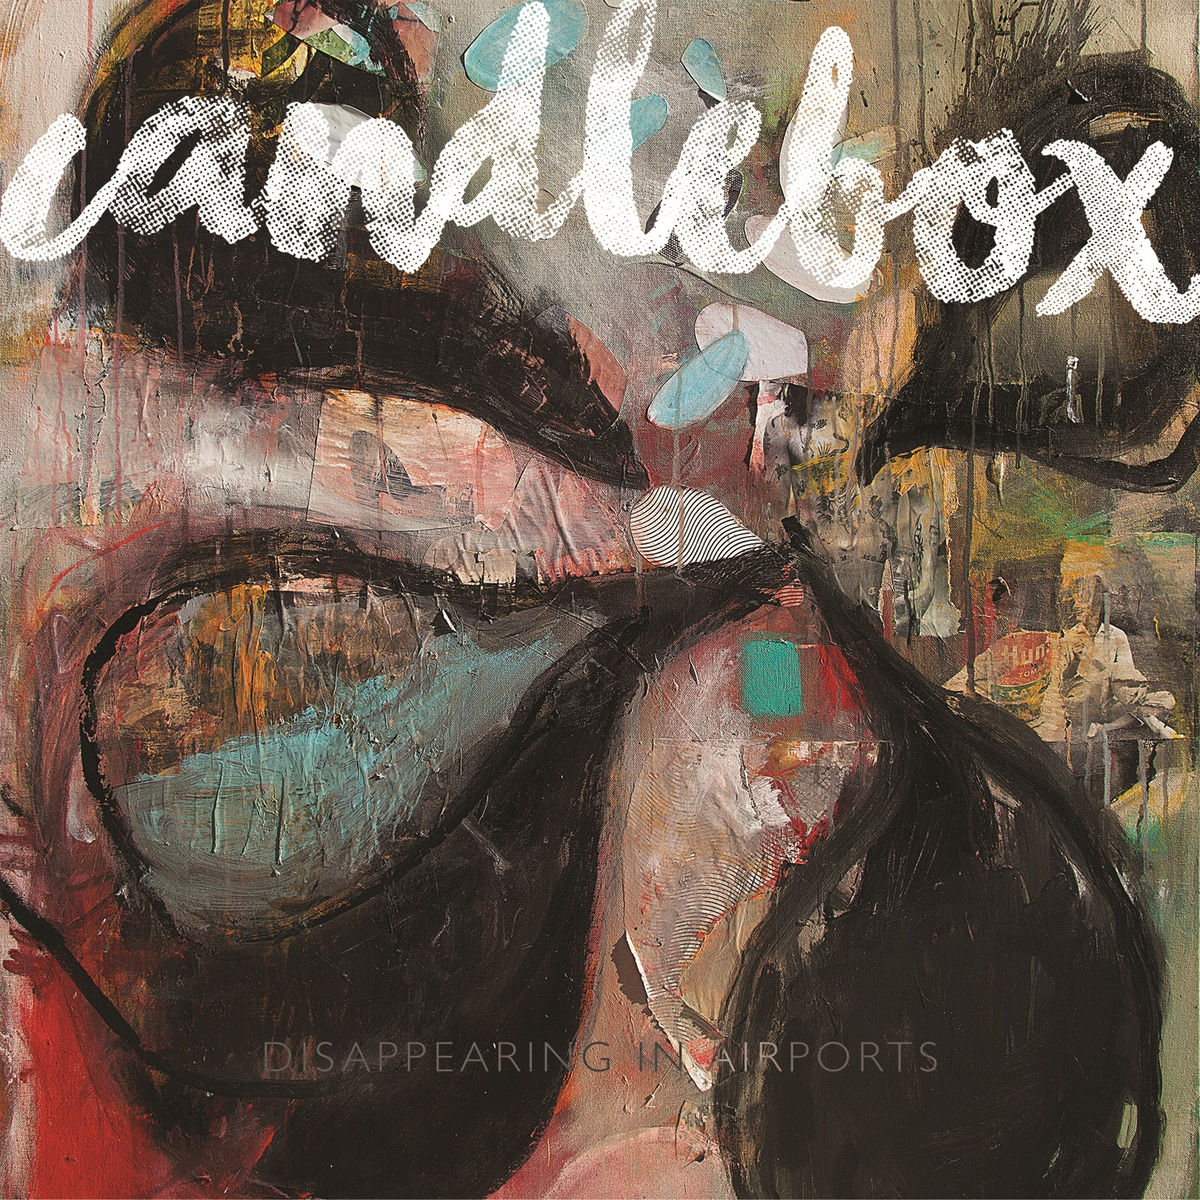 Candlebox - Disappearing in Airports (2016) [FLAC 24bit/48kHz]